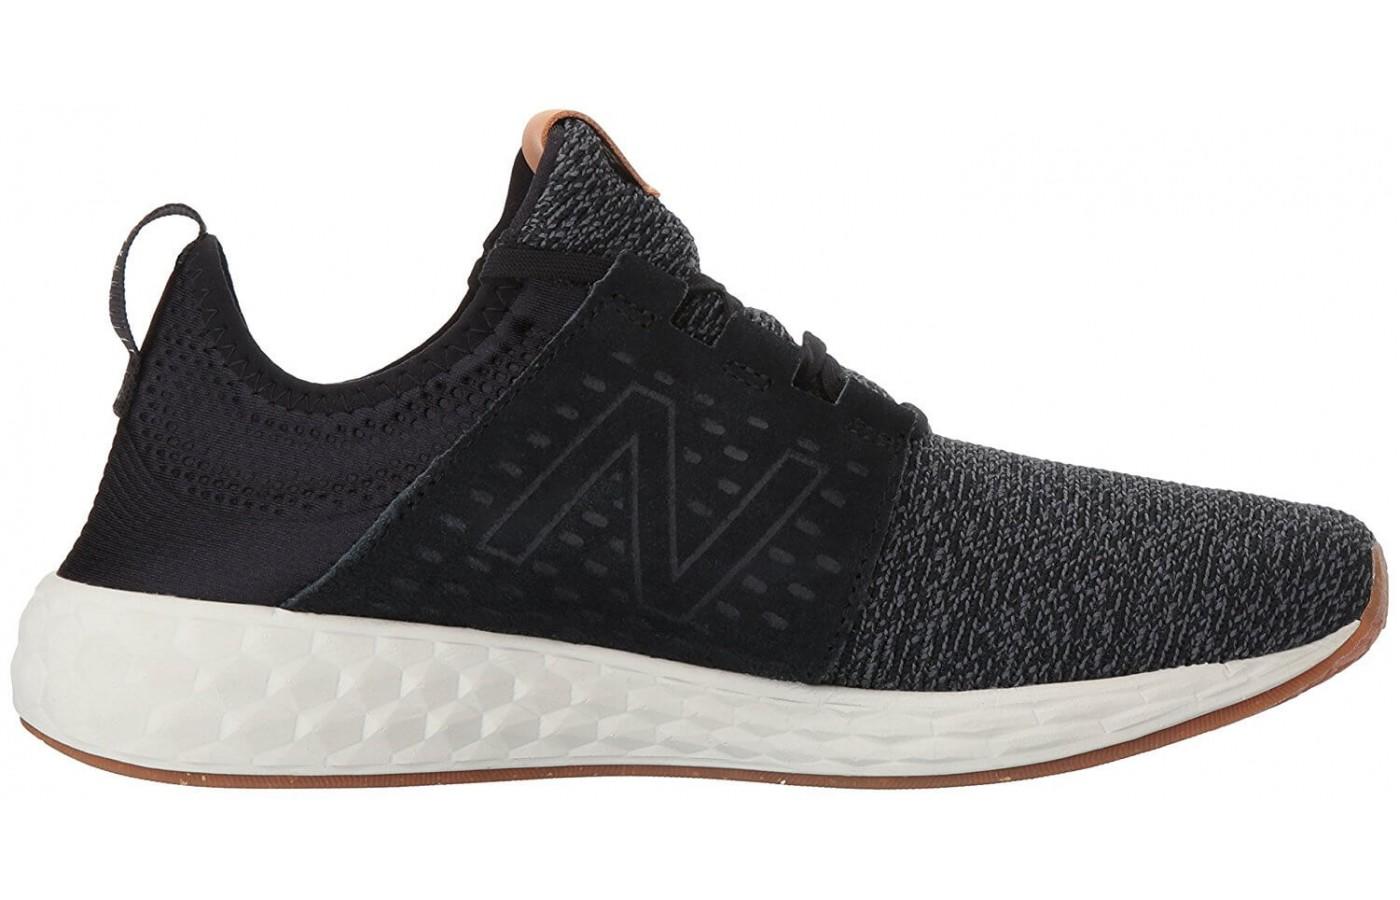 the New Balance Fresh Foam Cruz has a low profile with a blown rubber outsole